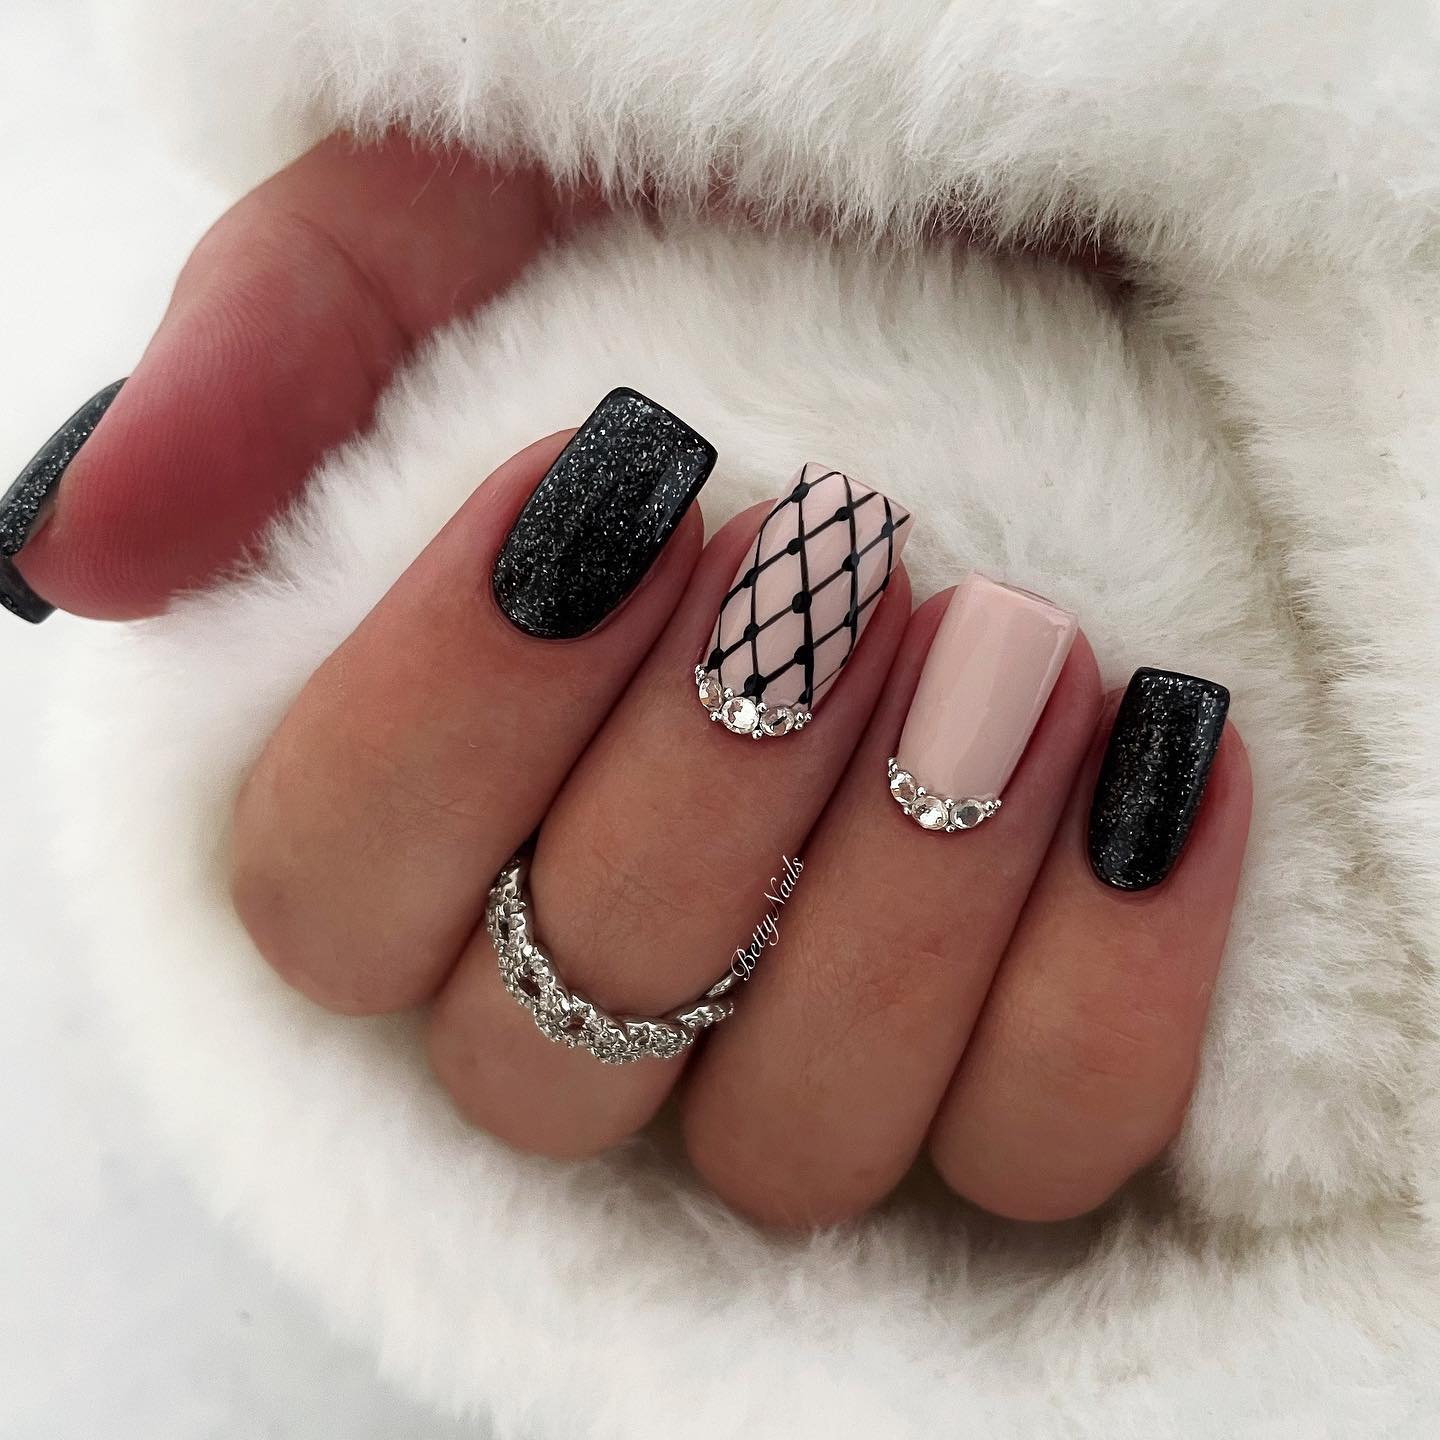 Black and Nude Nail Design with Rhinestones